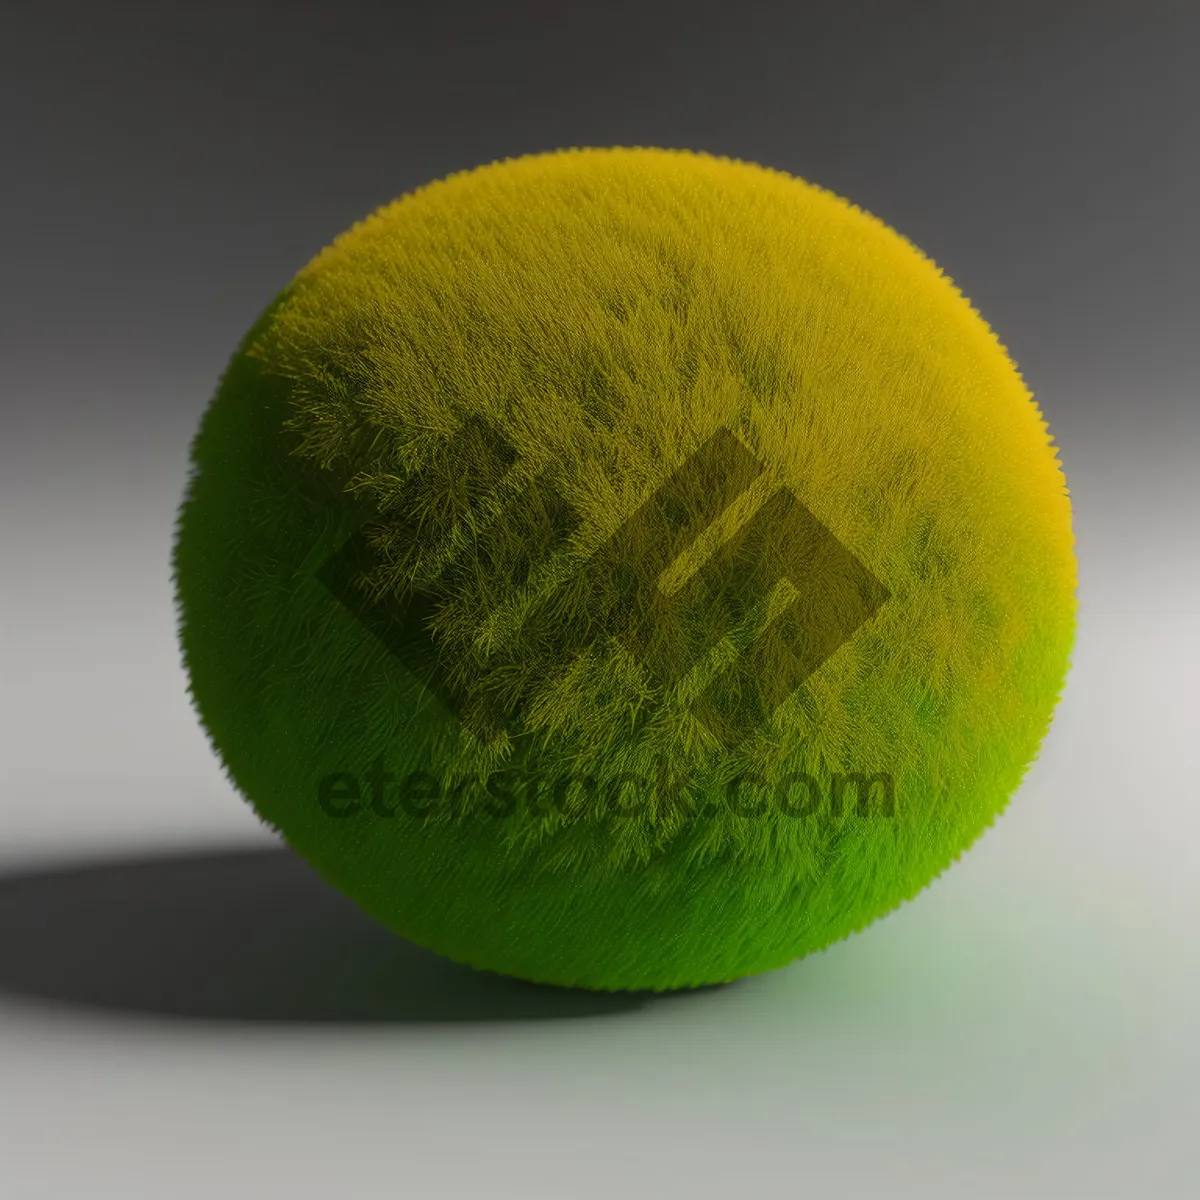 Picture of Vibrant Tennis Ball Close-up in Play